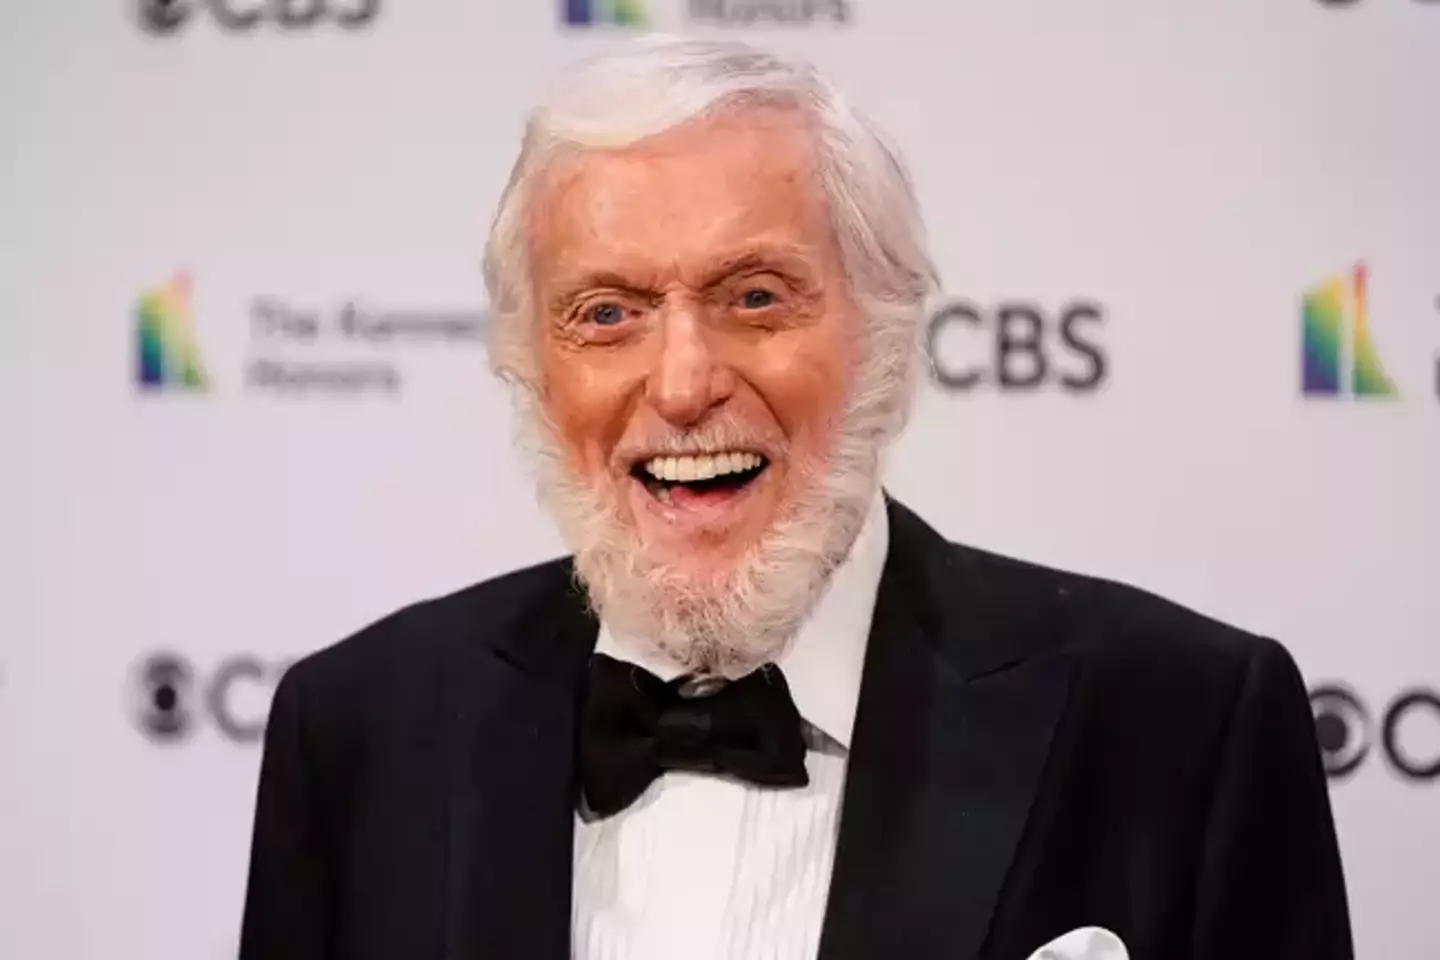 Dick Van Dyke was involved in a car crash after losing control of his vehicle and crashing it into a gate.